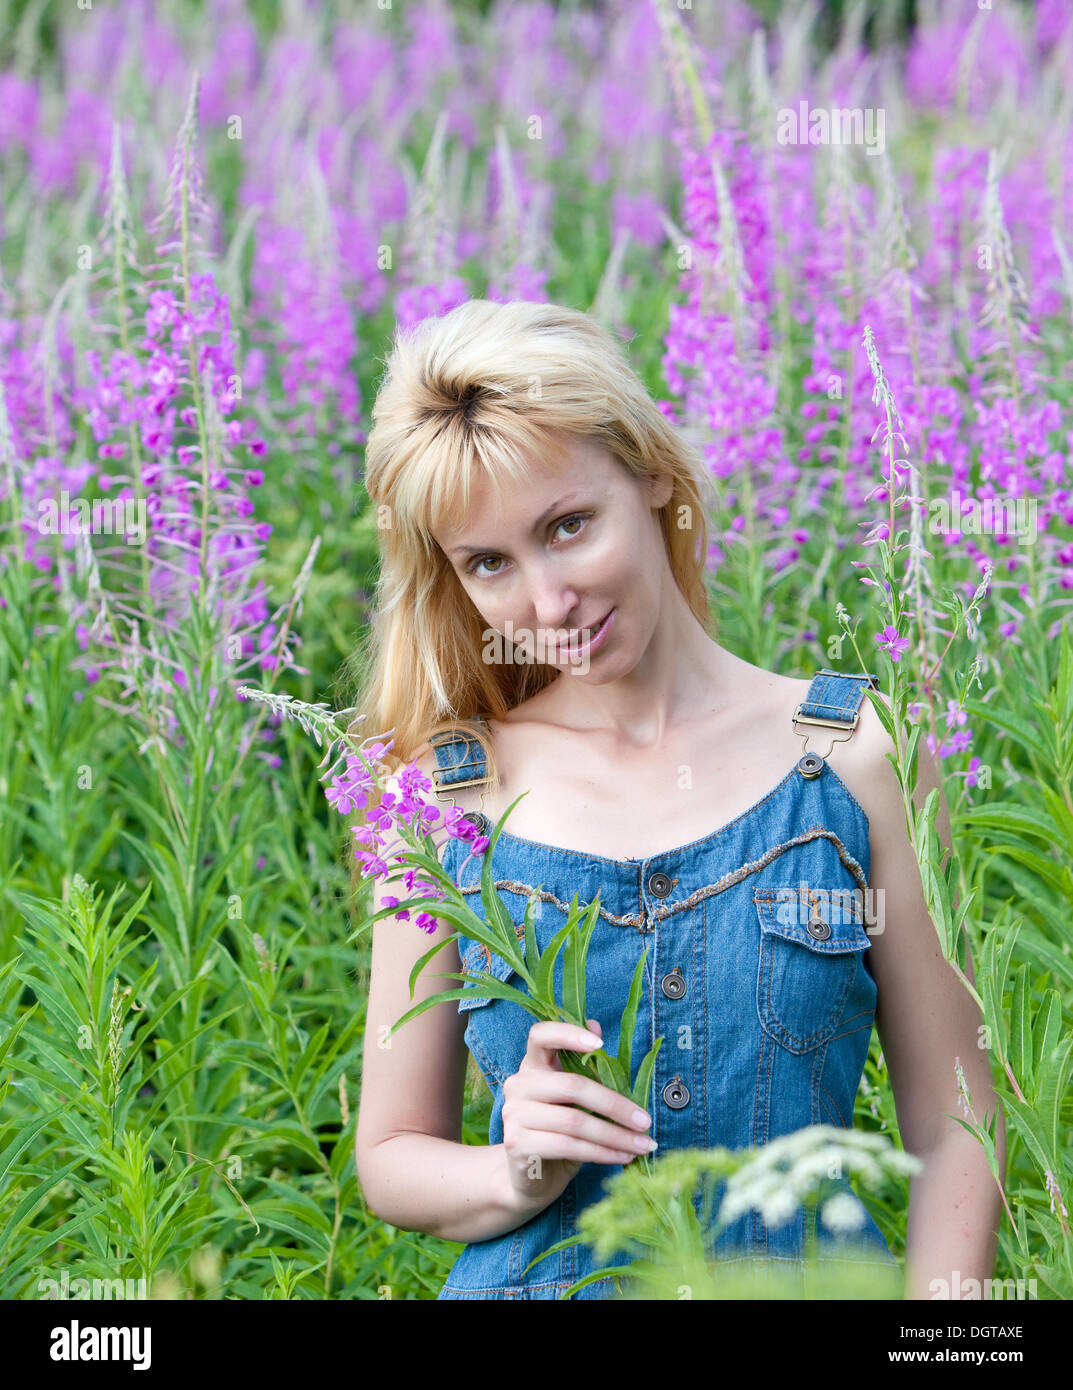 happy young woman in flowers blooming sally Stock Photo